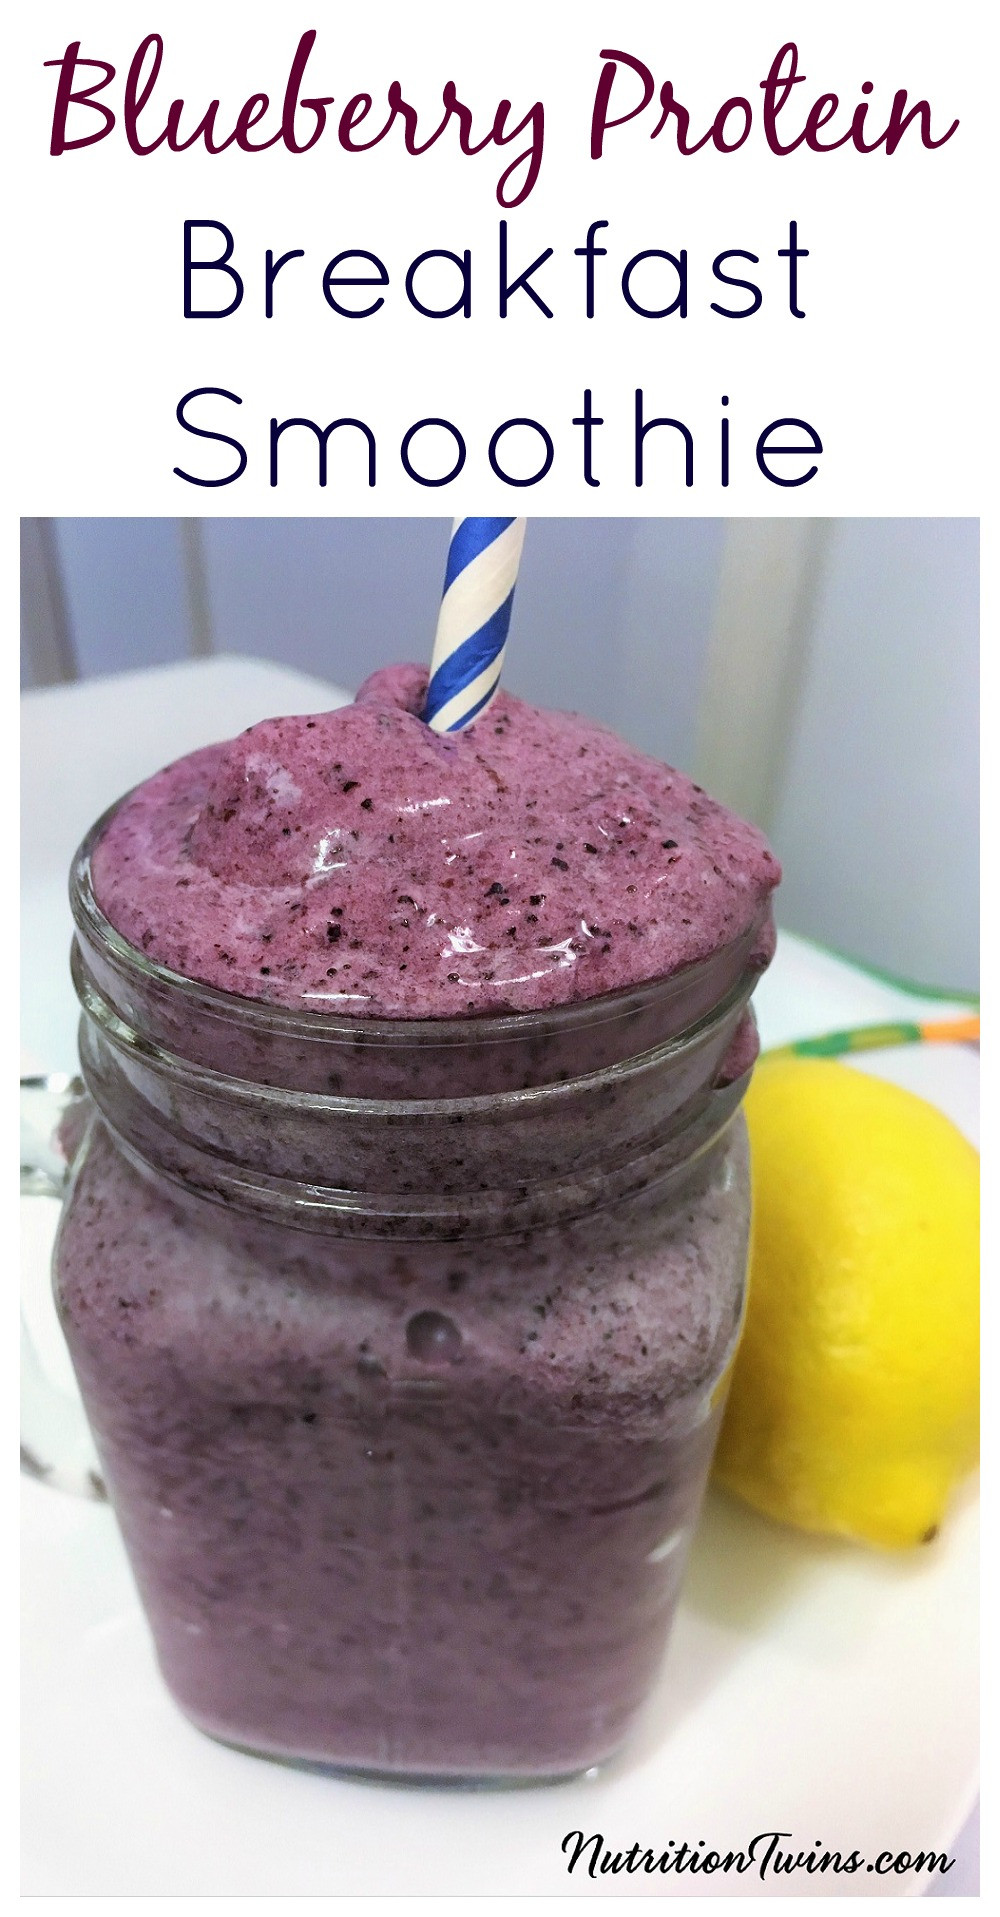 Breakfast Weight Loss Smoothies
 Blueberry Protein Weight Loss Breakfast Smoothie